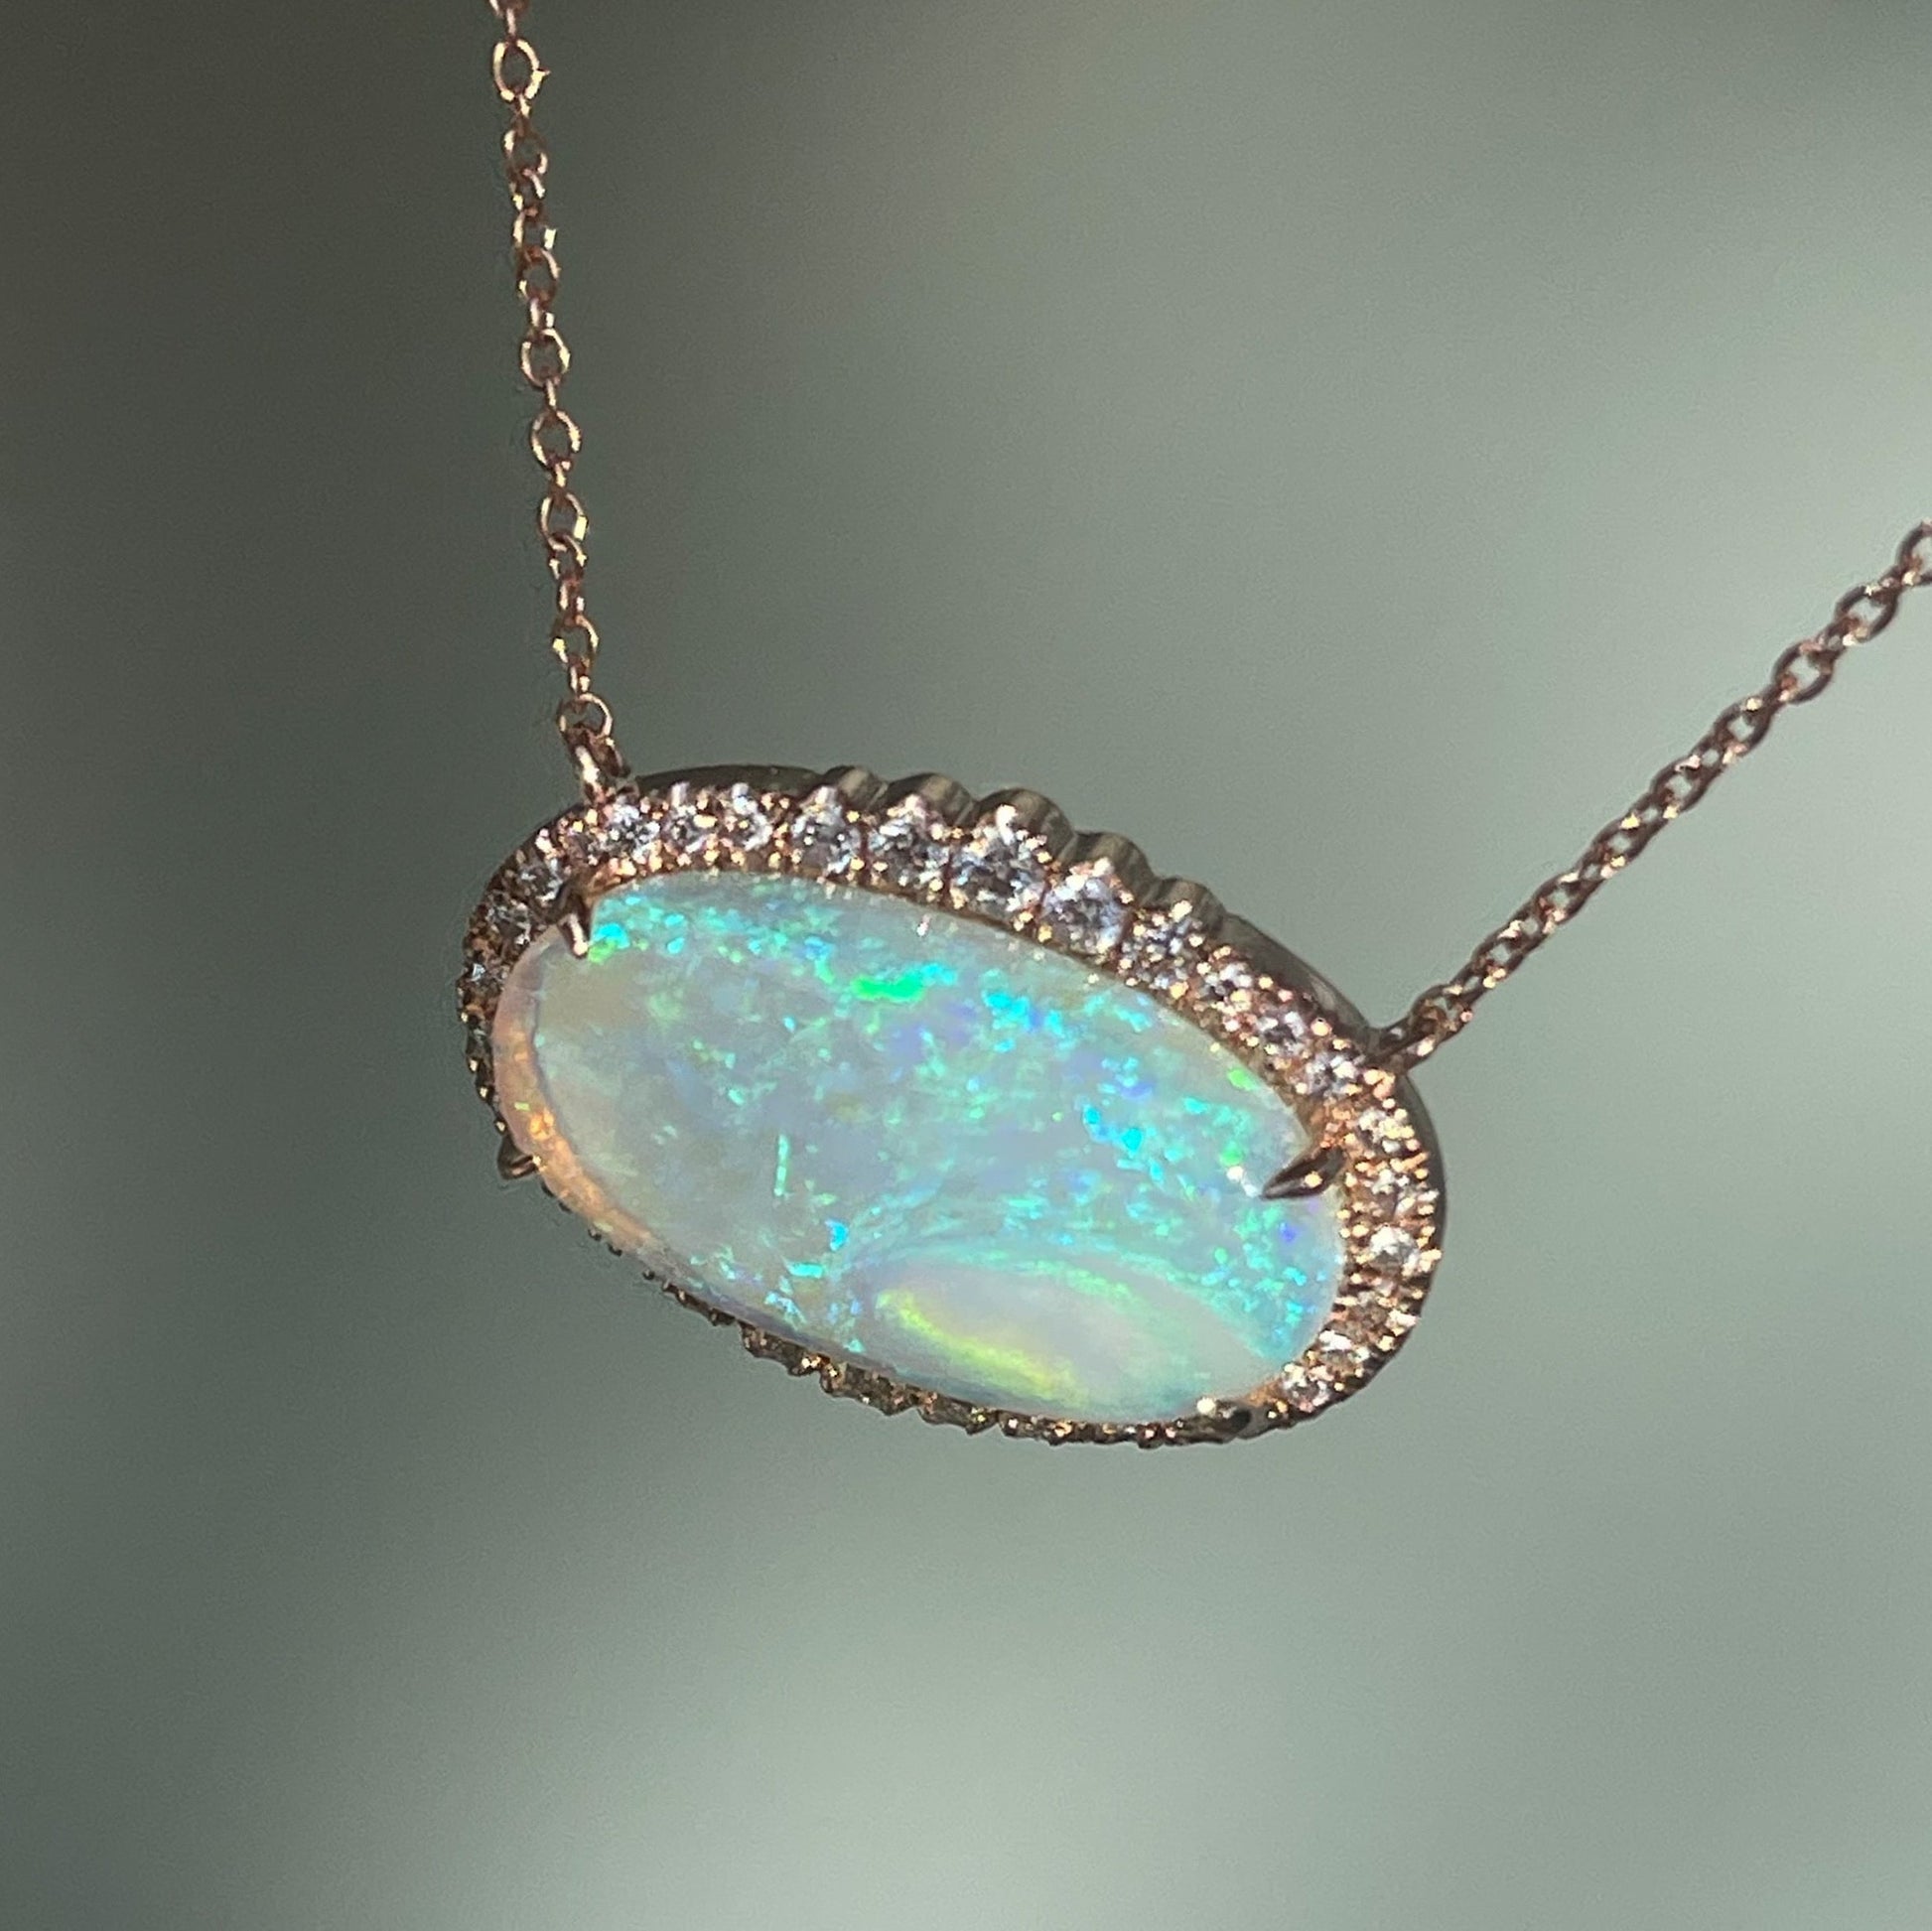  An Australian Opal Necklace by NIXIN Jewelry shown from above, looking down. Made in rose gold with a lavender and blue opal.